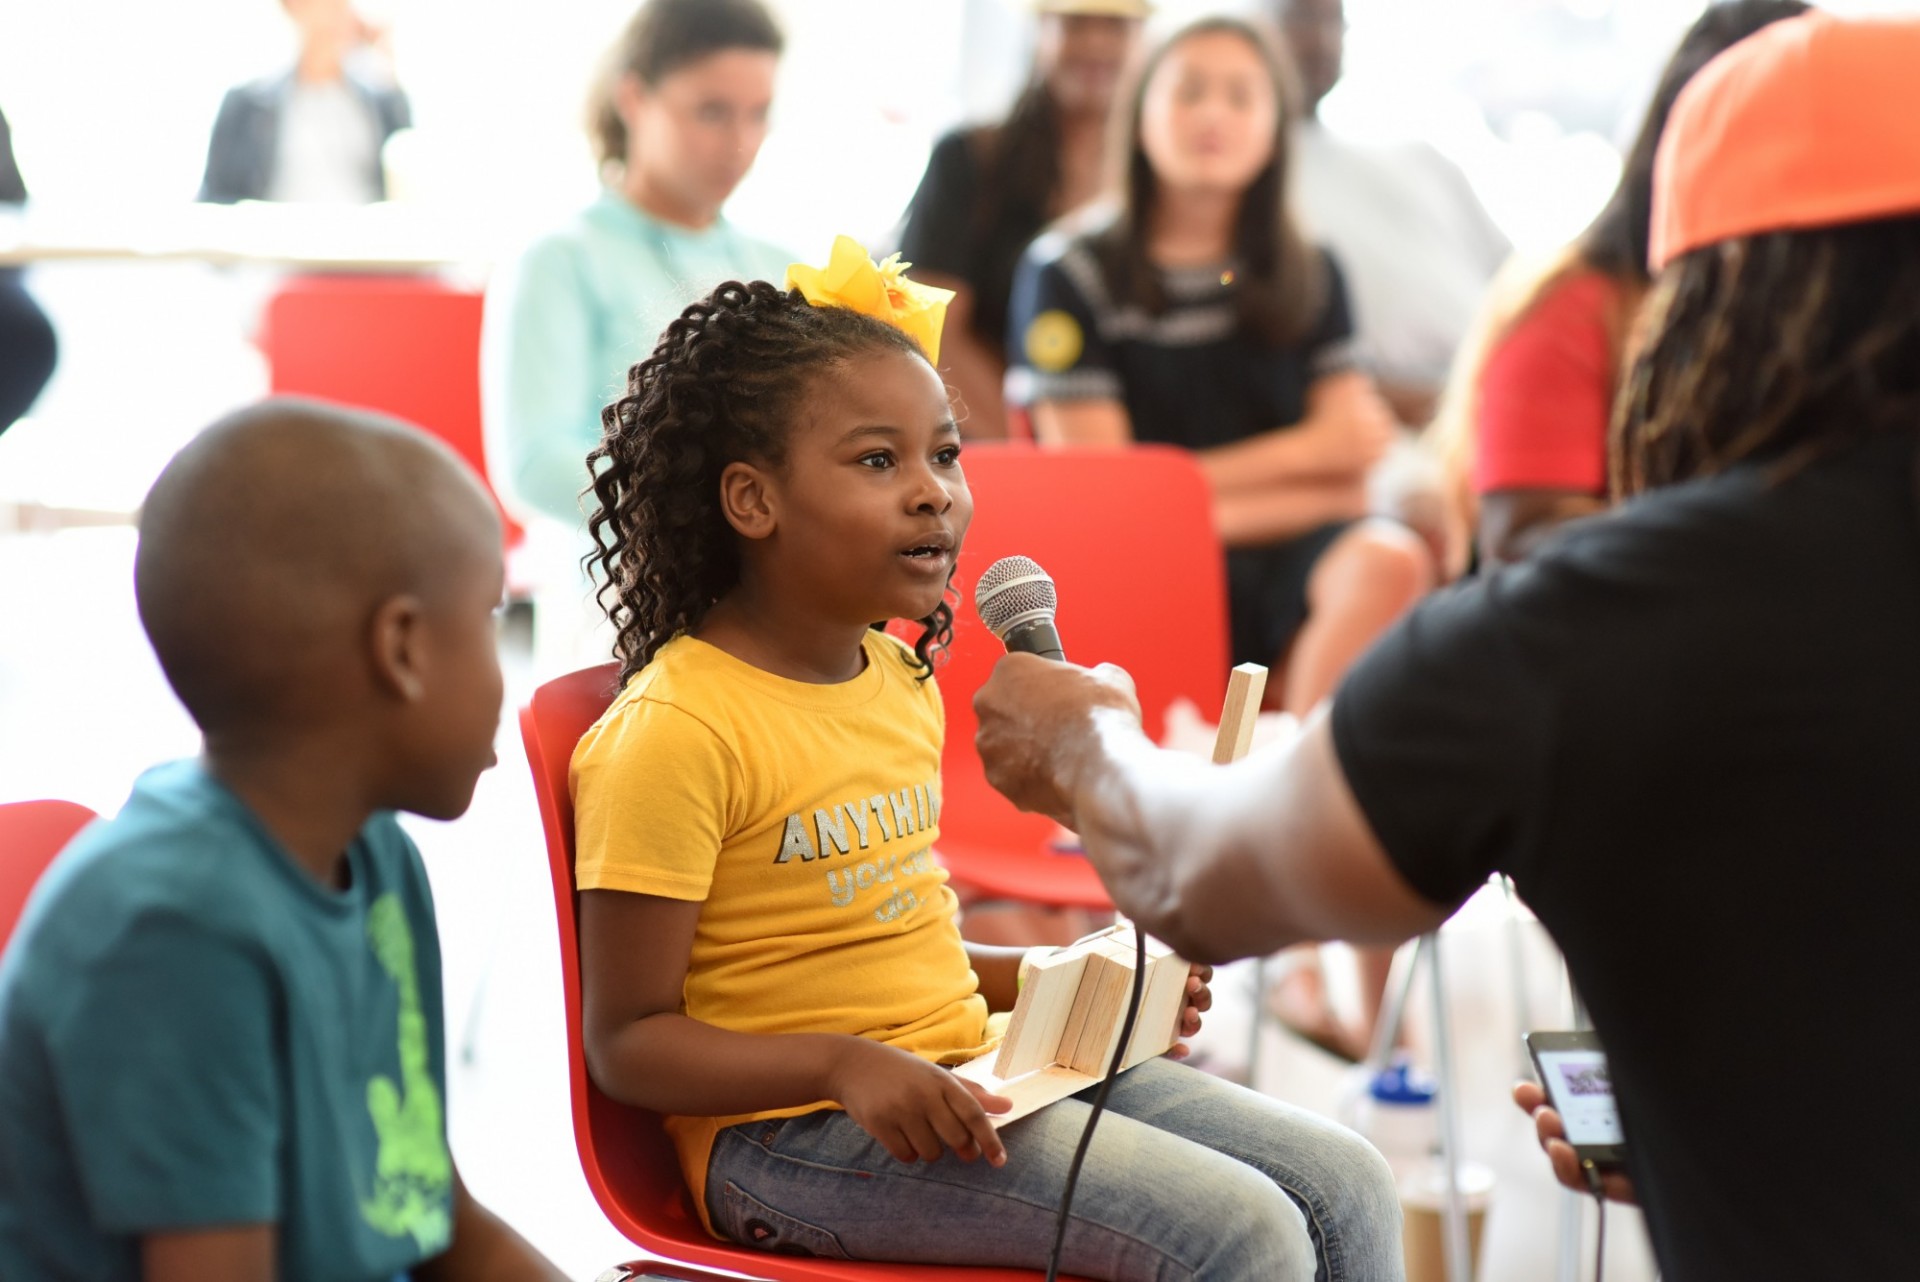 Instructor holds a microphone up to a young child in the audience during Community Day at The Forum